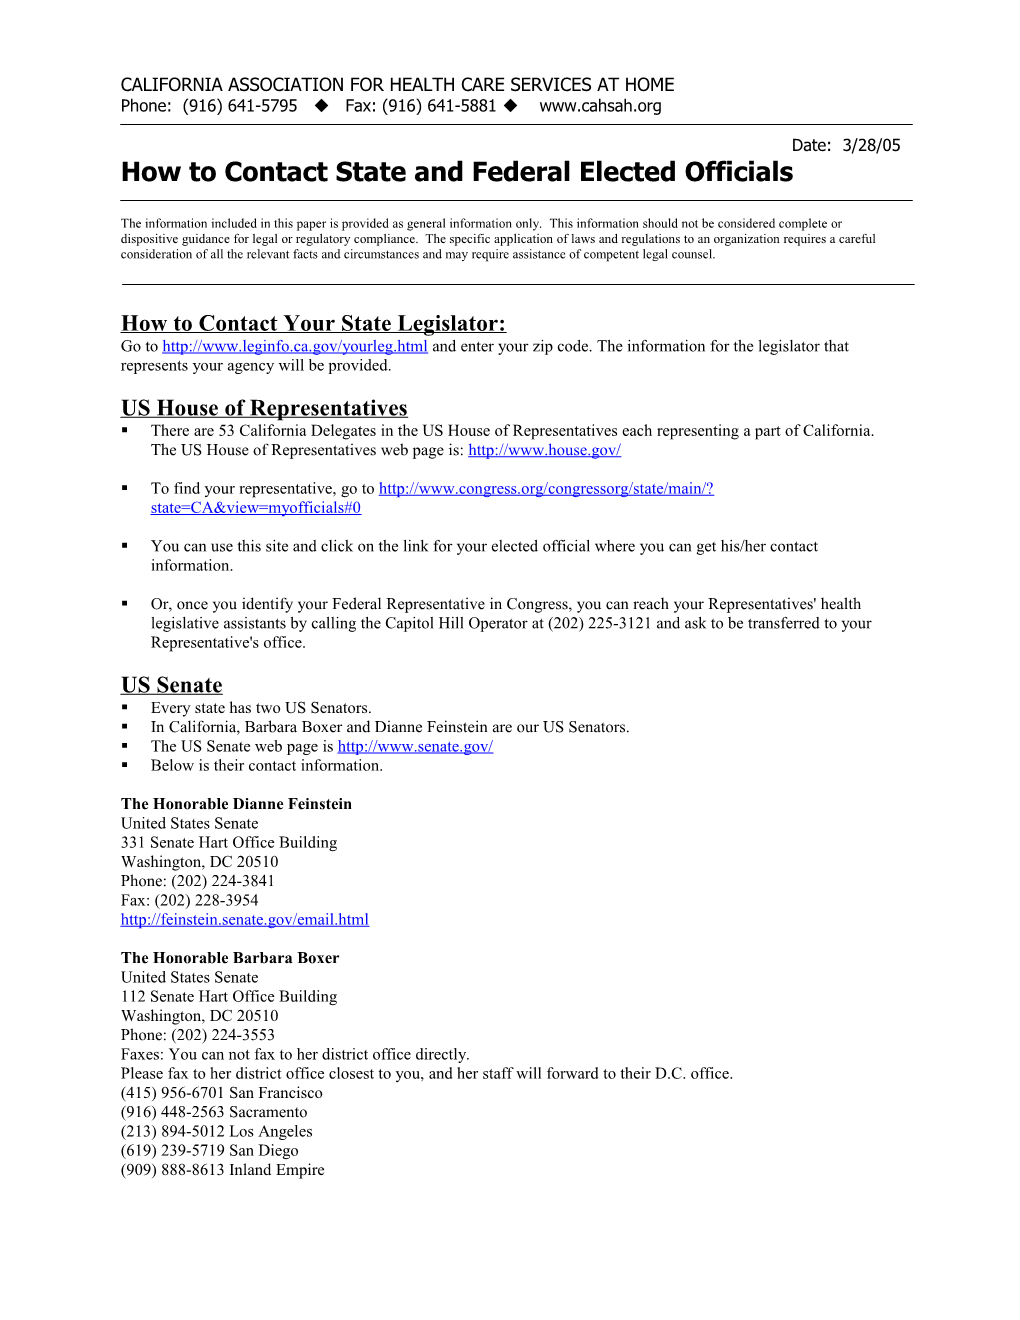 How to Contact State and Federal Elected Officials